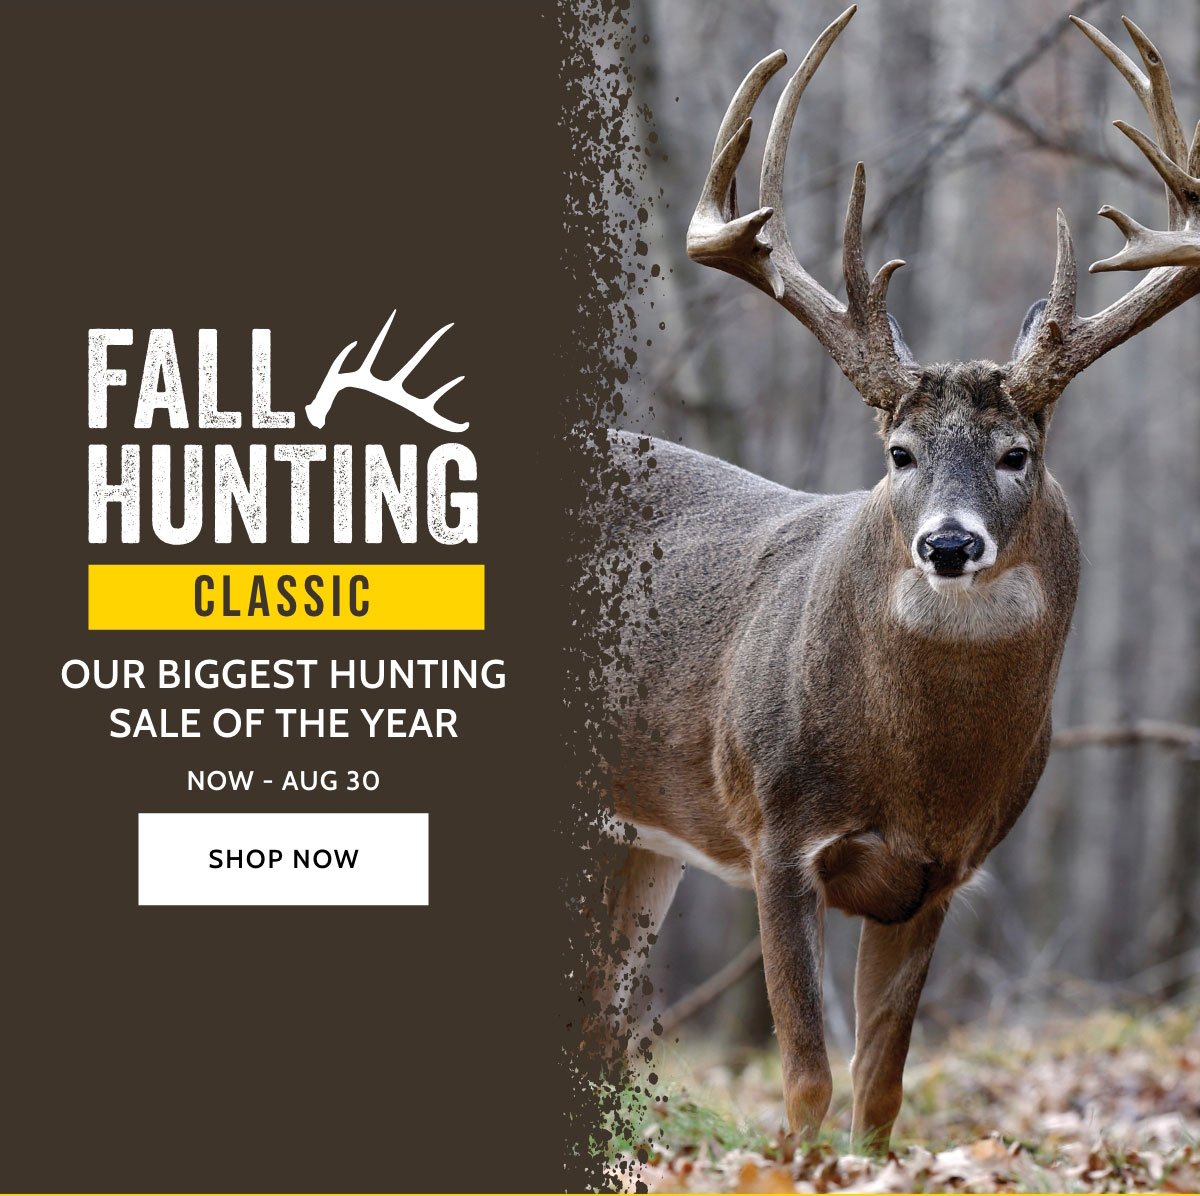 Bass Pro Shops & Cabela's are stocked and ready for deer season